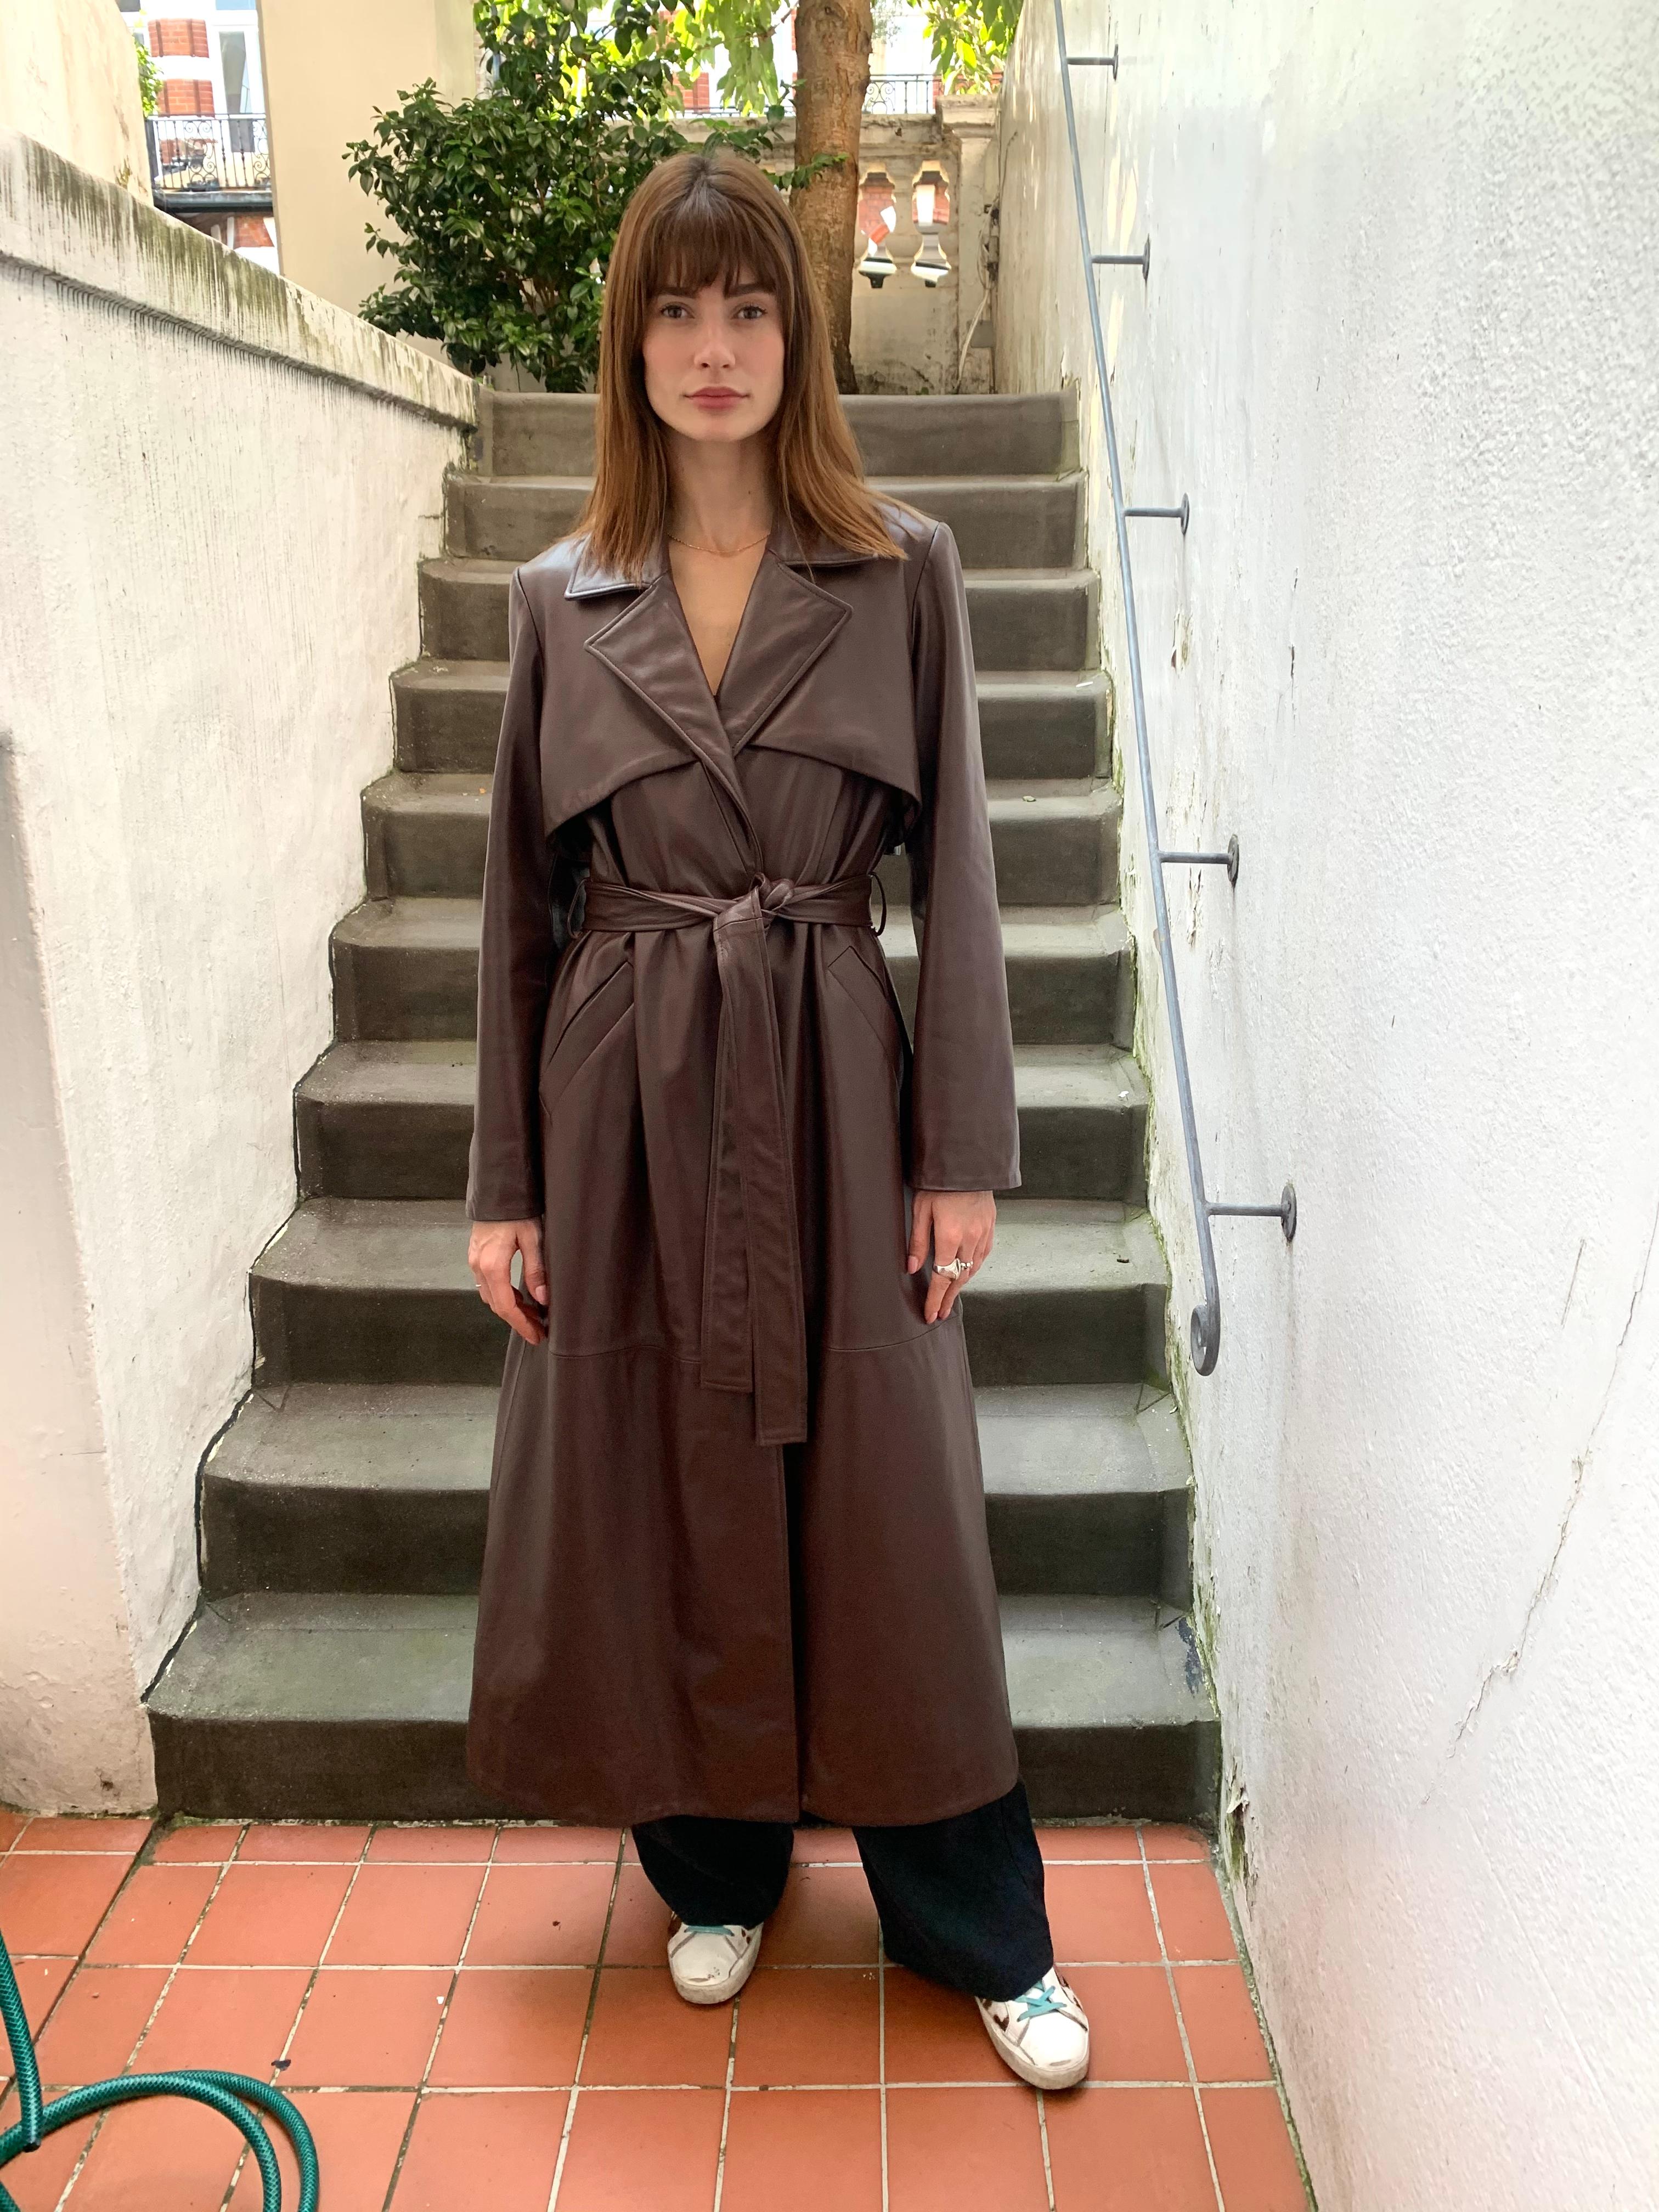 Black Verheyen London Leather Trench Coat in Chocolate Brown - Size uk 12 For Sale